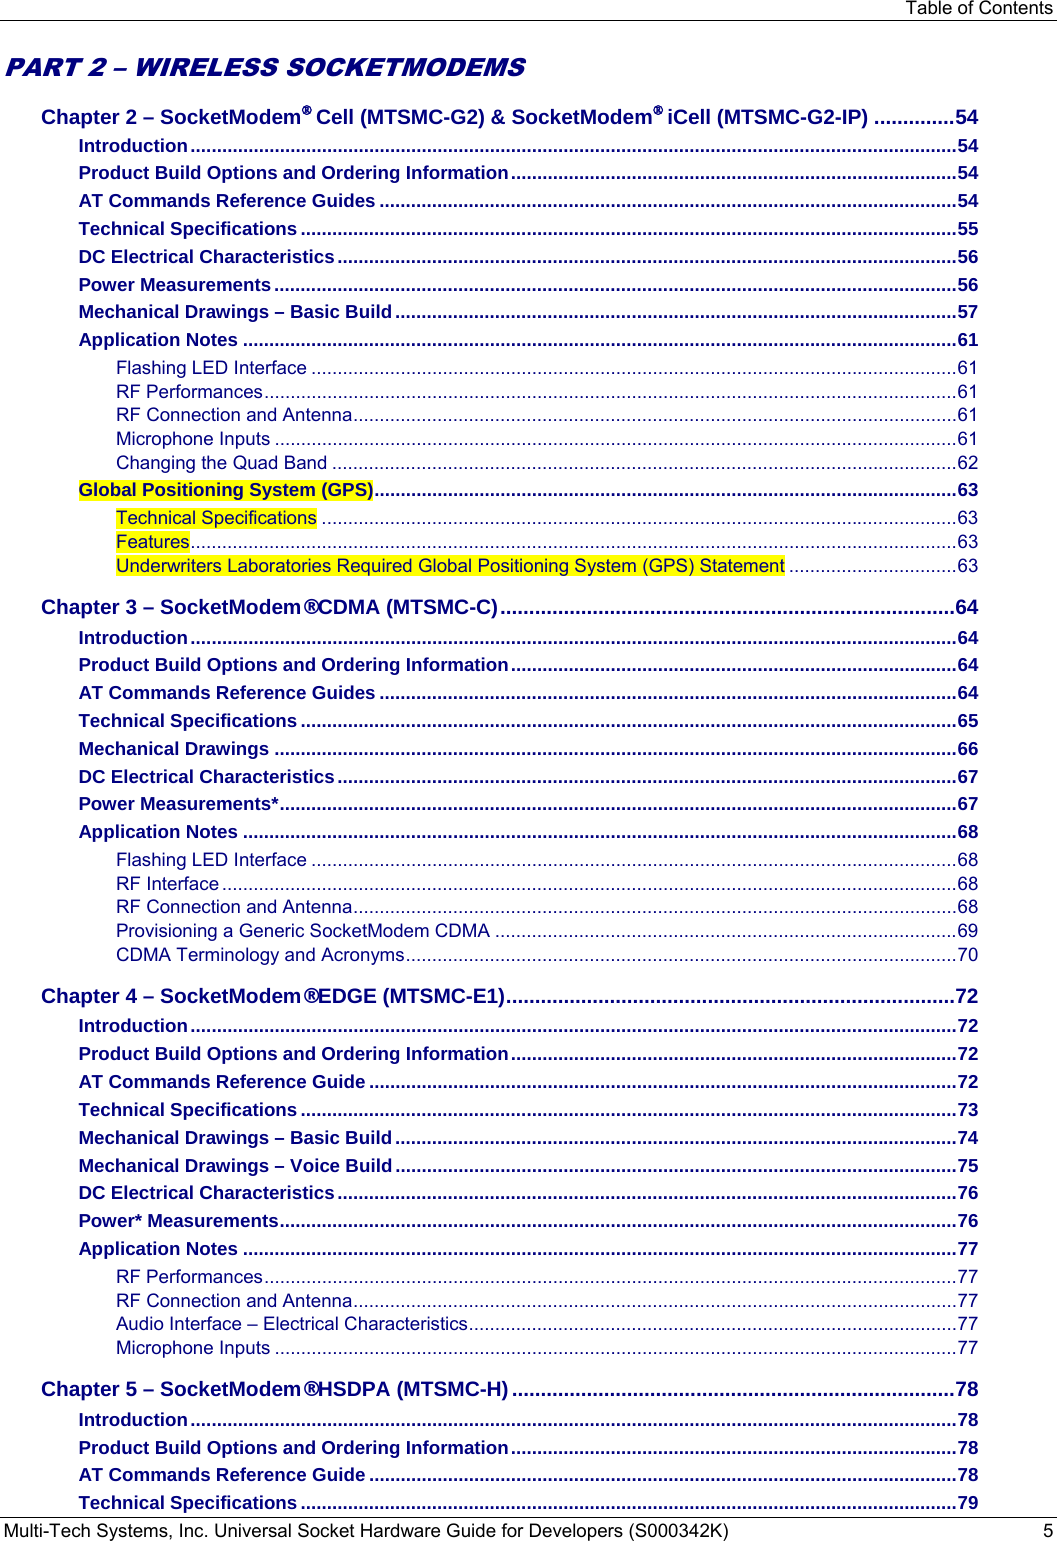 Table of Contents Multi-Tech Systems, Inc. Universal Socket Hardware Guide for Developers (S000342K)  5  PART 2 – WIRELESS SOCKETMODEMS  Chapter 2 – SocketModem® Cell (MTSMC-G2) &amp; SocketModem® iCell (MTSMC-G2-IP) .............. 54 Introduction .................................................................................................................................................. 54 Product Build Options and Ordering Information ..................................................................................... 54 AT Commands Reference Guides .............................................................................................................. 54 Technical Specifications ............................................................................................................................. 55 DC Electrical Characteristics ...................................................................................................................... 56 Power Measurements .................................................................................................................................. 56 Mechanical Drawings – Basic Build ........................................................................................................... 57 Application Notes ........................................................................................................................................ 61 Flashing LED Interface ........................................................................................................................... 61 RF Performances .................................................................................................................................... 61 RF Connection and Antenna ................................................................................................................... 61 Microphone Inputs .................................................................................................................................. 61 Changing the Quad Band ....................................................................................................................... 62 Global Positioning System (GPS) ............................................................................................................... 63 Technical Specifications ......................................................................................................................... 63 Features .................................................................................................................................................. 63 Underwriters Laboratories Required Global Positioning System (GPS) Statement ................................ 63 Chapter 3 – SocketModem® CDMA (MTSMC-C) ............................................................................... 64 Introduction .................................................................................................................................................. 64 Product Build Options and Ordering Information ..................................................................................... 64 AT Commands Reference Guides .............................................................................................................. 64 Technical Specifications ............................................................................................................................. 65 Mechanical Drawings .................................................................................................................................. 66 DC Electrical Characteristics ...................................................................................................................... 67 Power Measurements* ................................................................................................................................. 67 Application Notes ........................................................................................................................................ 68 Flashing LED Interface ........................................................................................................................... 68 RF Interface ............................................................................................................................................ 68 RF Connection and Antenna ................................................................................................................... 68 Provisioning a Generic SocketModem CDMA ........................................................................................ 69 CDMA Terminology and Acronyms ......................................................................................................... 70 Chapter 4 – SocketModem® EDGE (MTSMC-E1) .............................................................................. 72 Introduction .................................................................................................................................................. 72 Product Build Options and Ordering Information ..................................................................................... 72 AT Commands Reference Guide ................................................................................................................ 72 Technical Specifications ............................................................................................................................. 73 Mechanical Drawings – Basic Build ........................................................................................................... 74 Mechanical Drawings – Voice Build ........................................................................................................... 75 DC Electrical Characteristics ...................................................................................................................... 76 Power* Measurements ................................................................................................................................. 76 Application Notes ........................................................................................................................................ 77 RF Performances .................................................................................................................................... 77 RF Connection and Antenna ................................................................................................................... 77 Audio Interface – Electrical Characteristics ............................................................................................. 77 Microphone Inputs .................................................................................................................................. 77 Chapter 5 – SocketModem® HSDPA (MTSMC-H) ............................................................................. 78 Introduction .................................................................................................................................................. 78 Product Build Options and Ordering Information ..................................................................................... 78 AT Commands Reference Guide ................................................................................................................ 78 Technical Specifications ............................................................................................................................. 79 